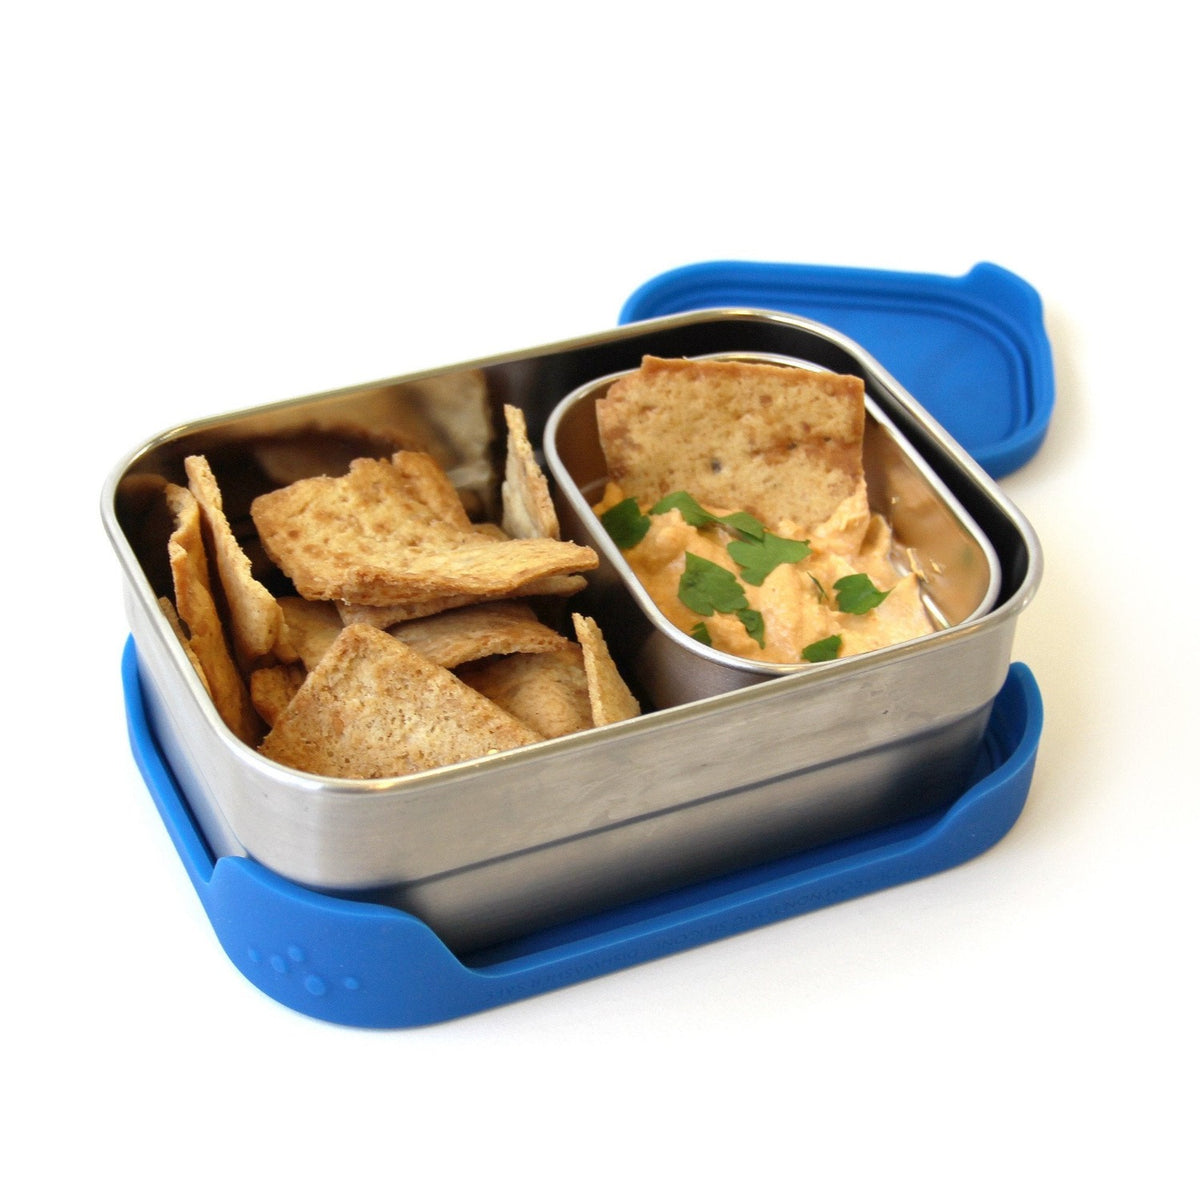 Stainless Steel 3-in-1 Bento Lunch Box + Free life-time Holds 6 Cups of Food Pod